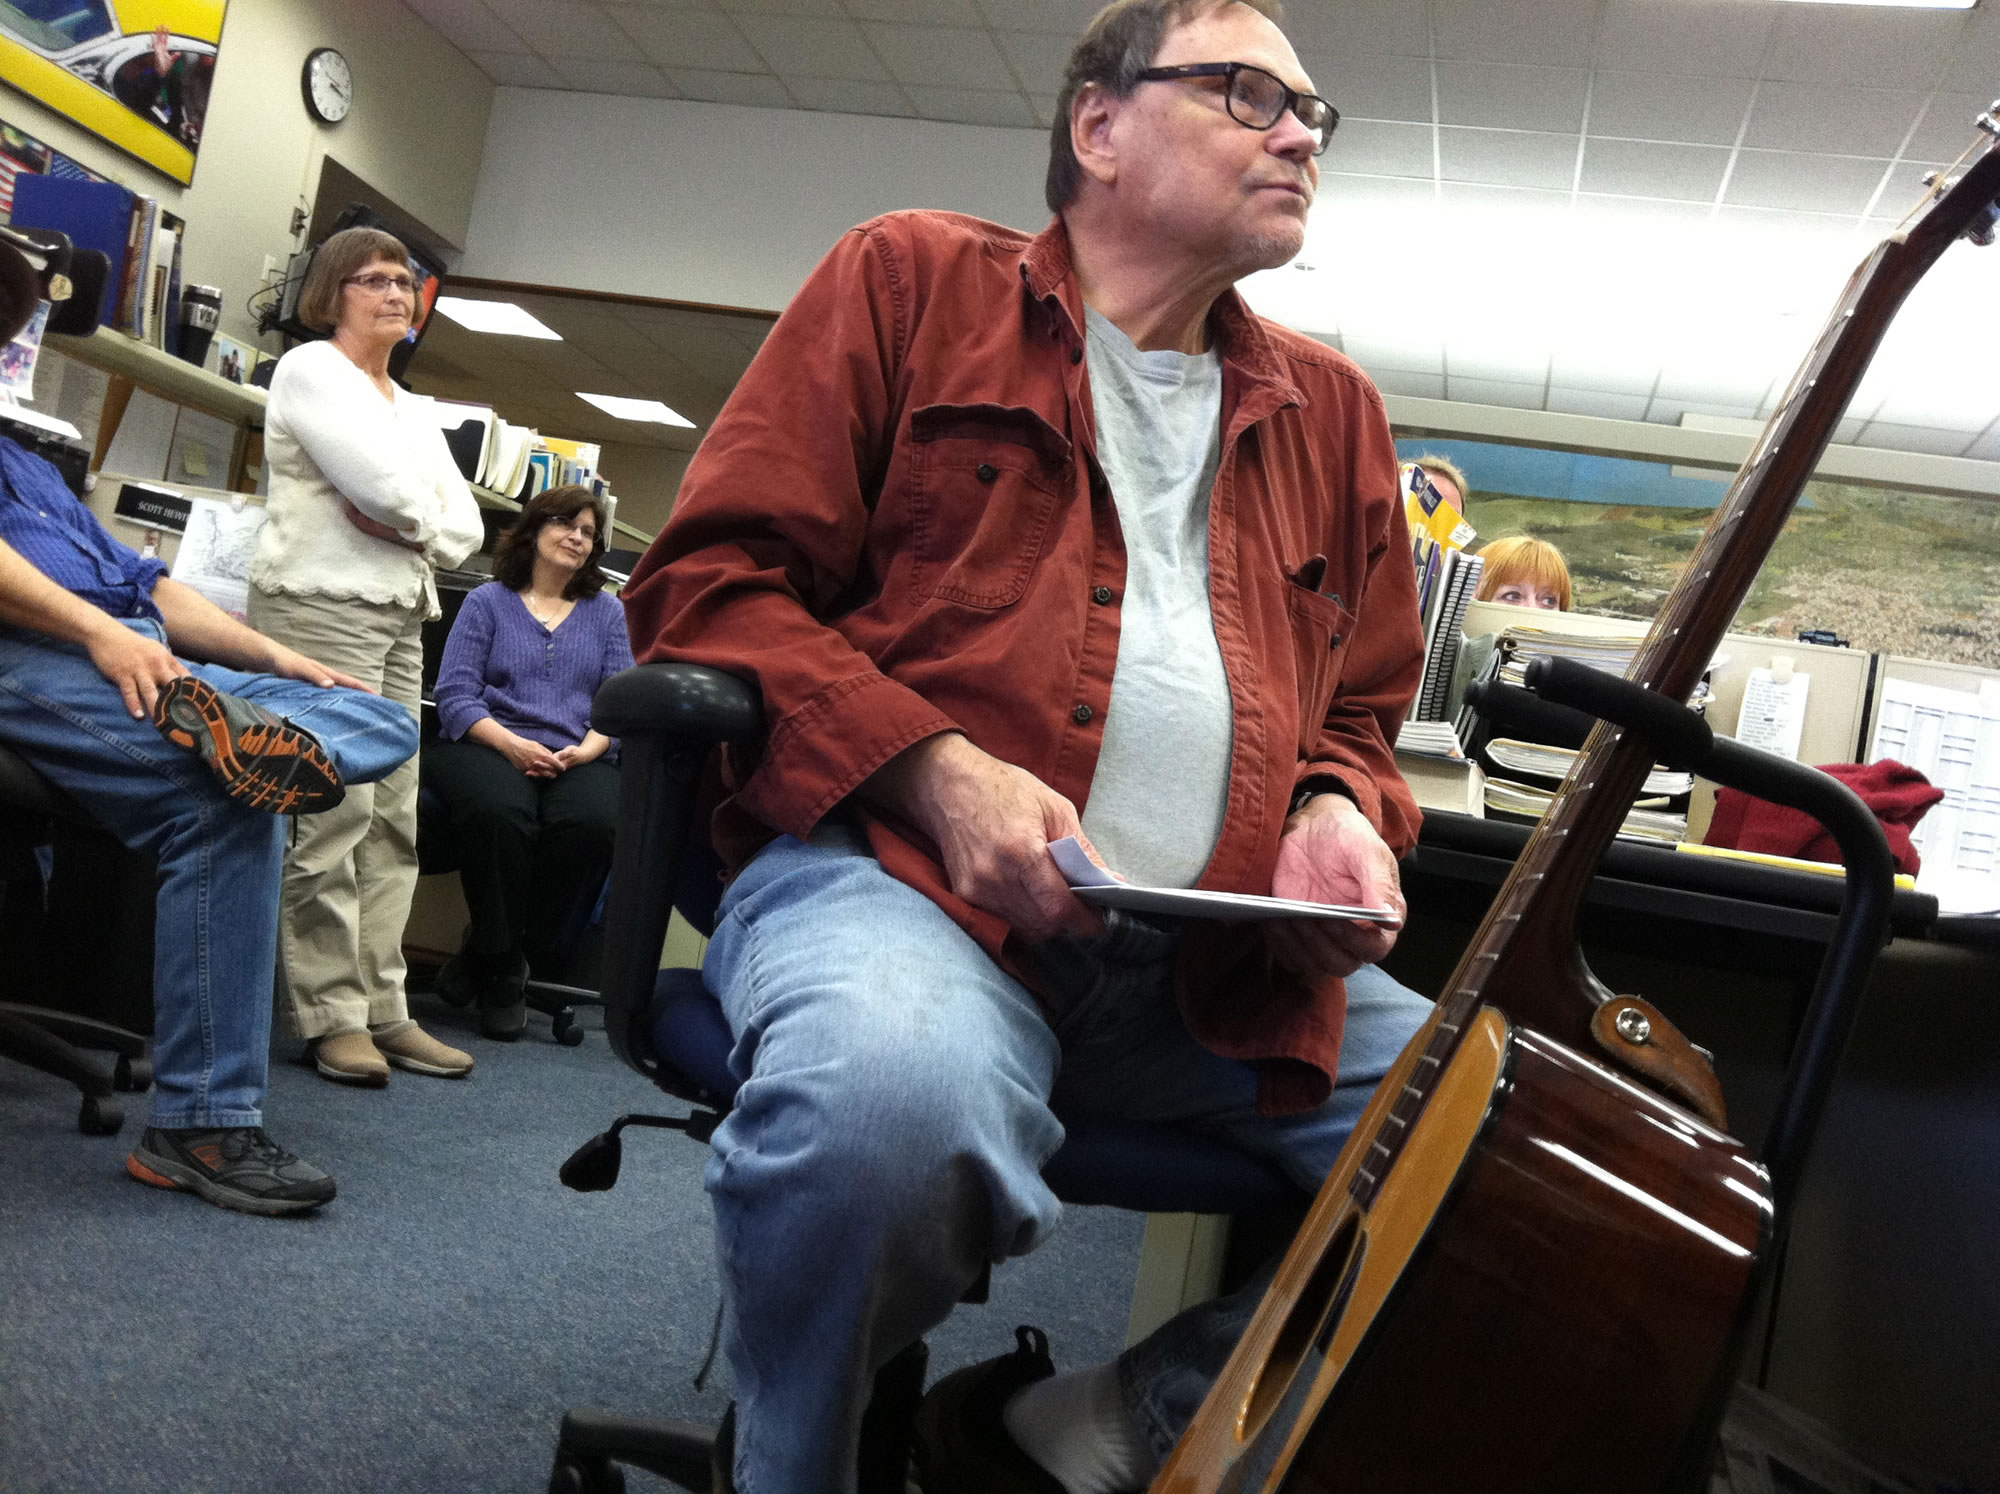 John Branton listens to tributes at a celebration of his career last year at The Columbian.